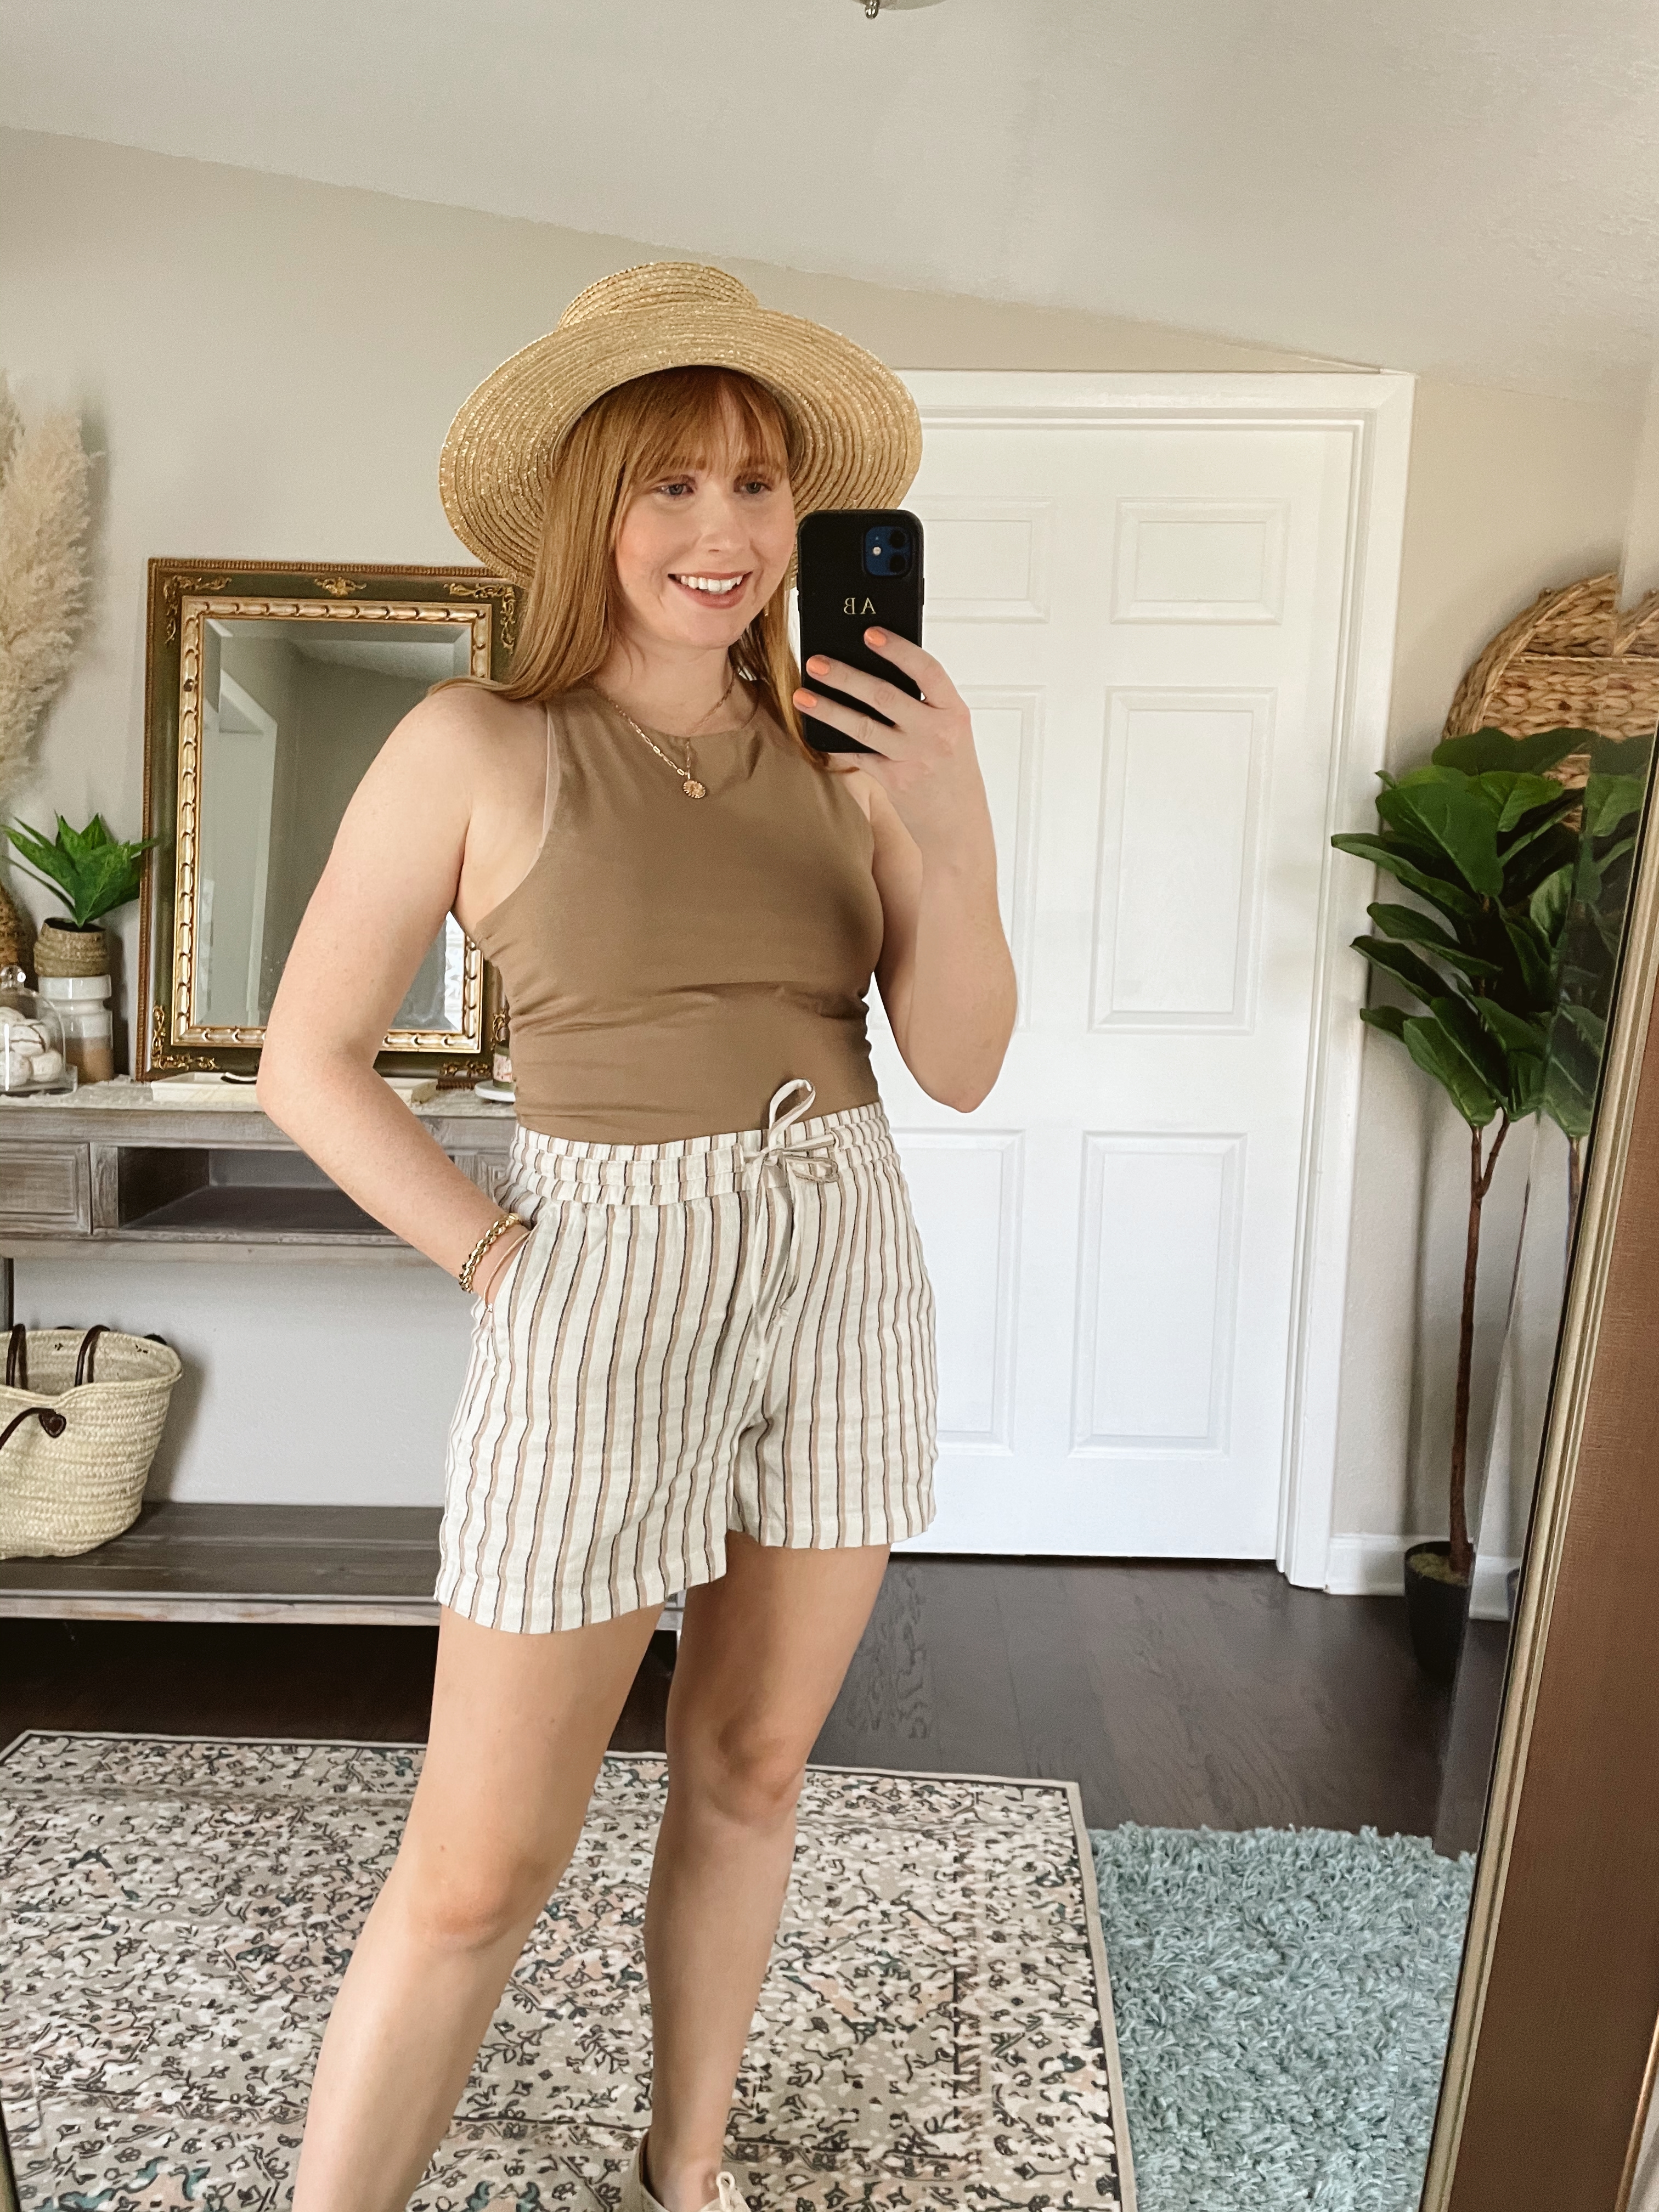 Stylist Shares How to Improve My Warm-Weather Outfits + Photos